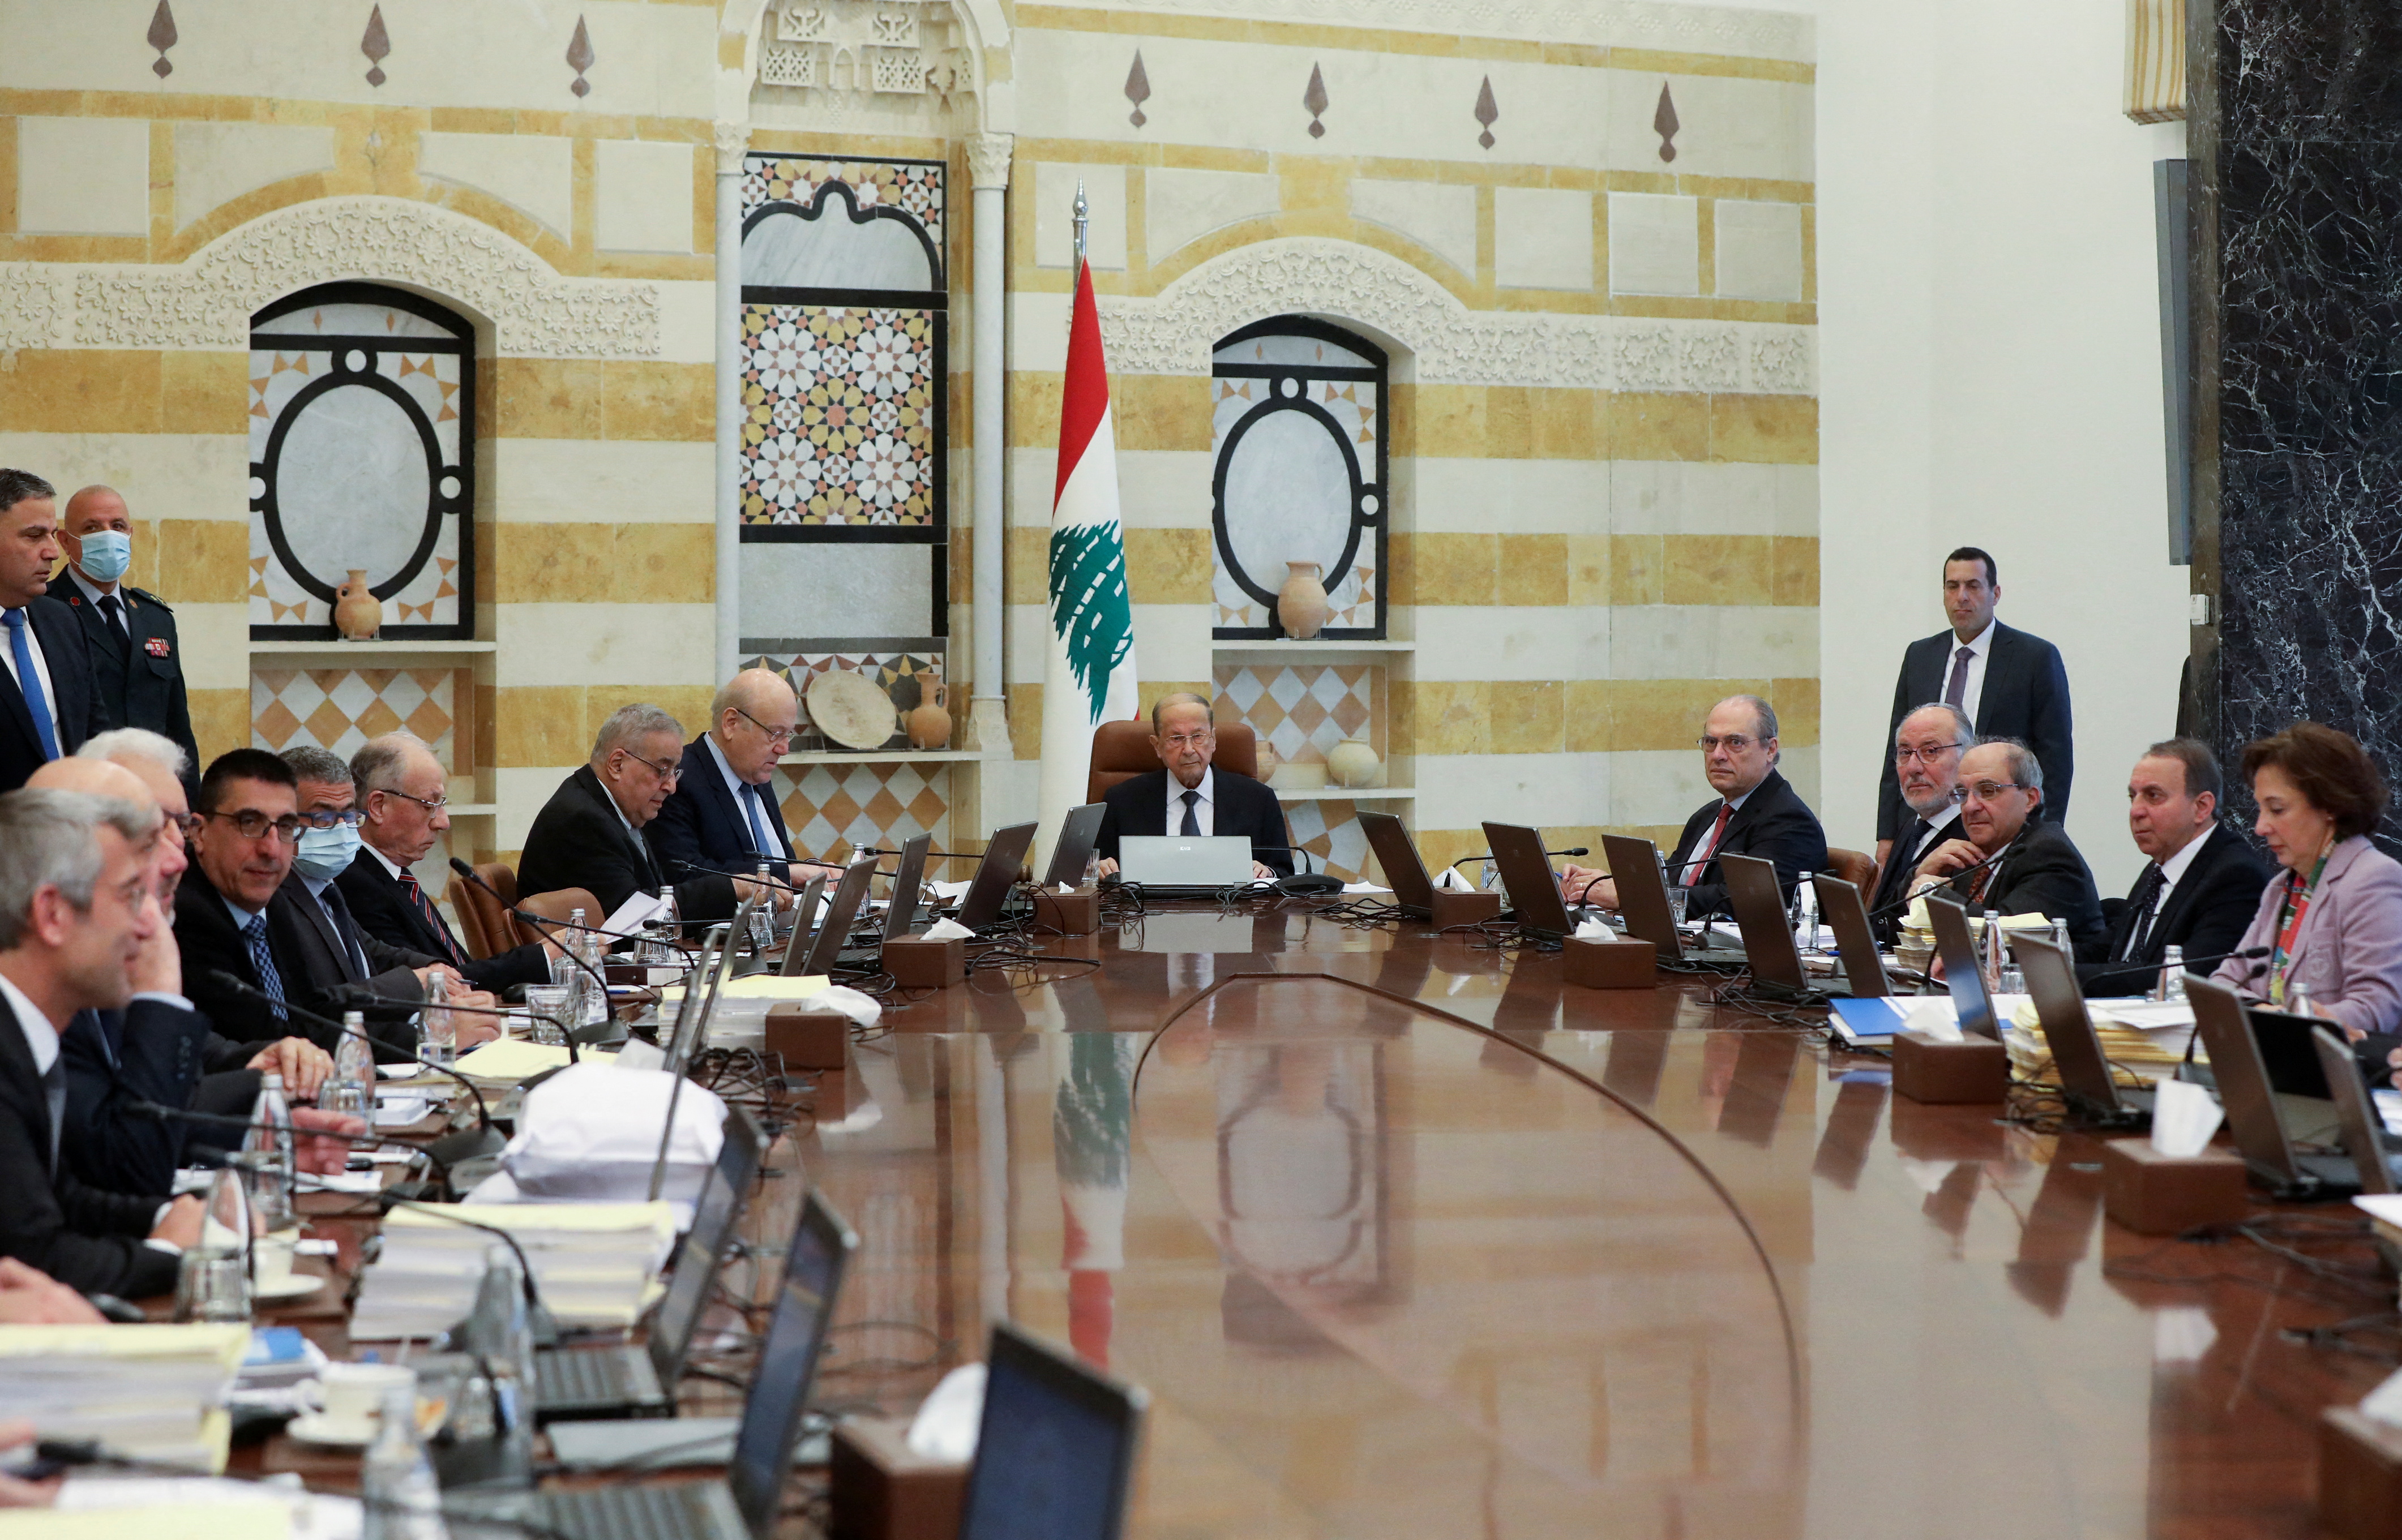 Lebanon's President Michel Aoun heads a cabinet meeting at the presidential palace in Baabda